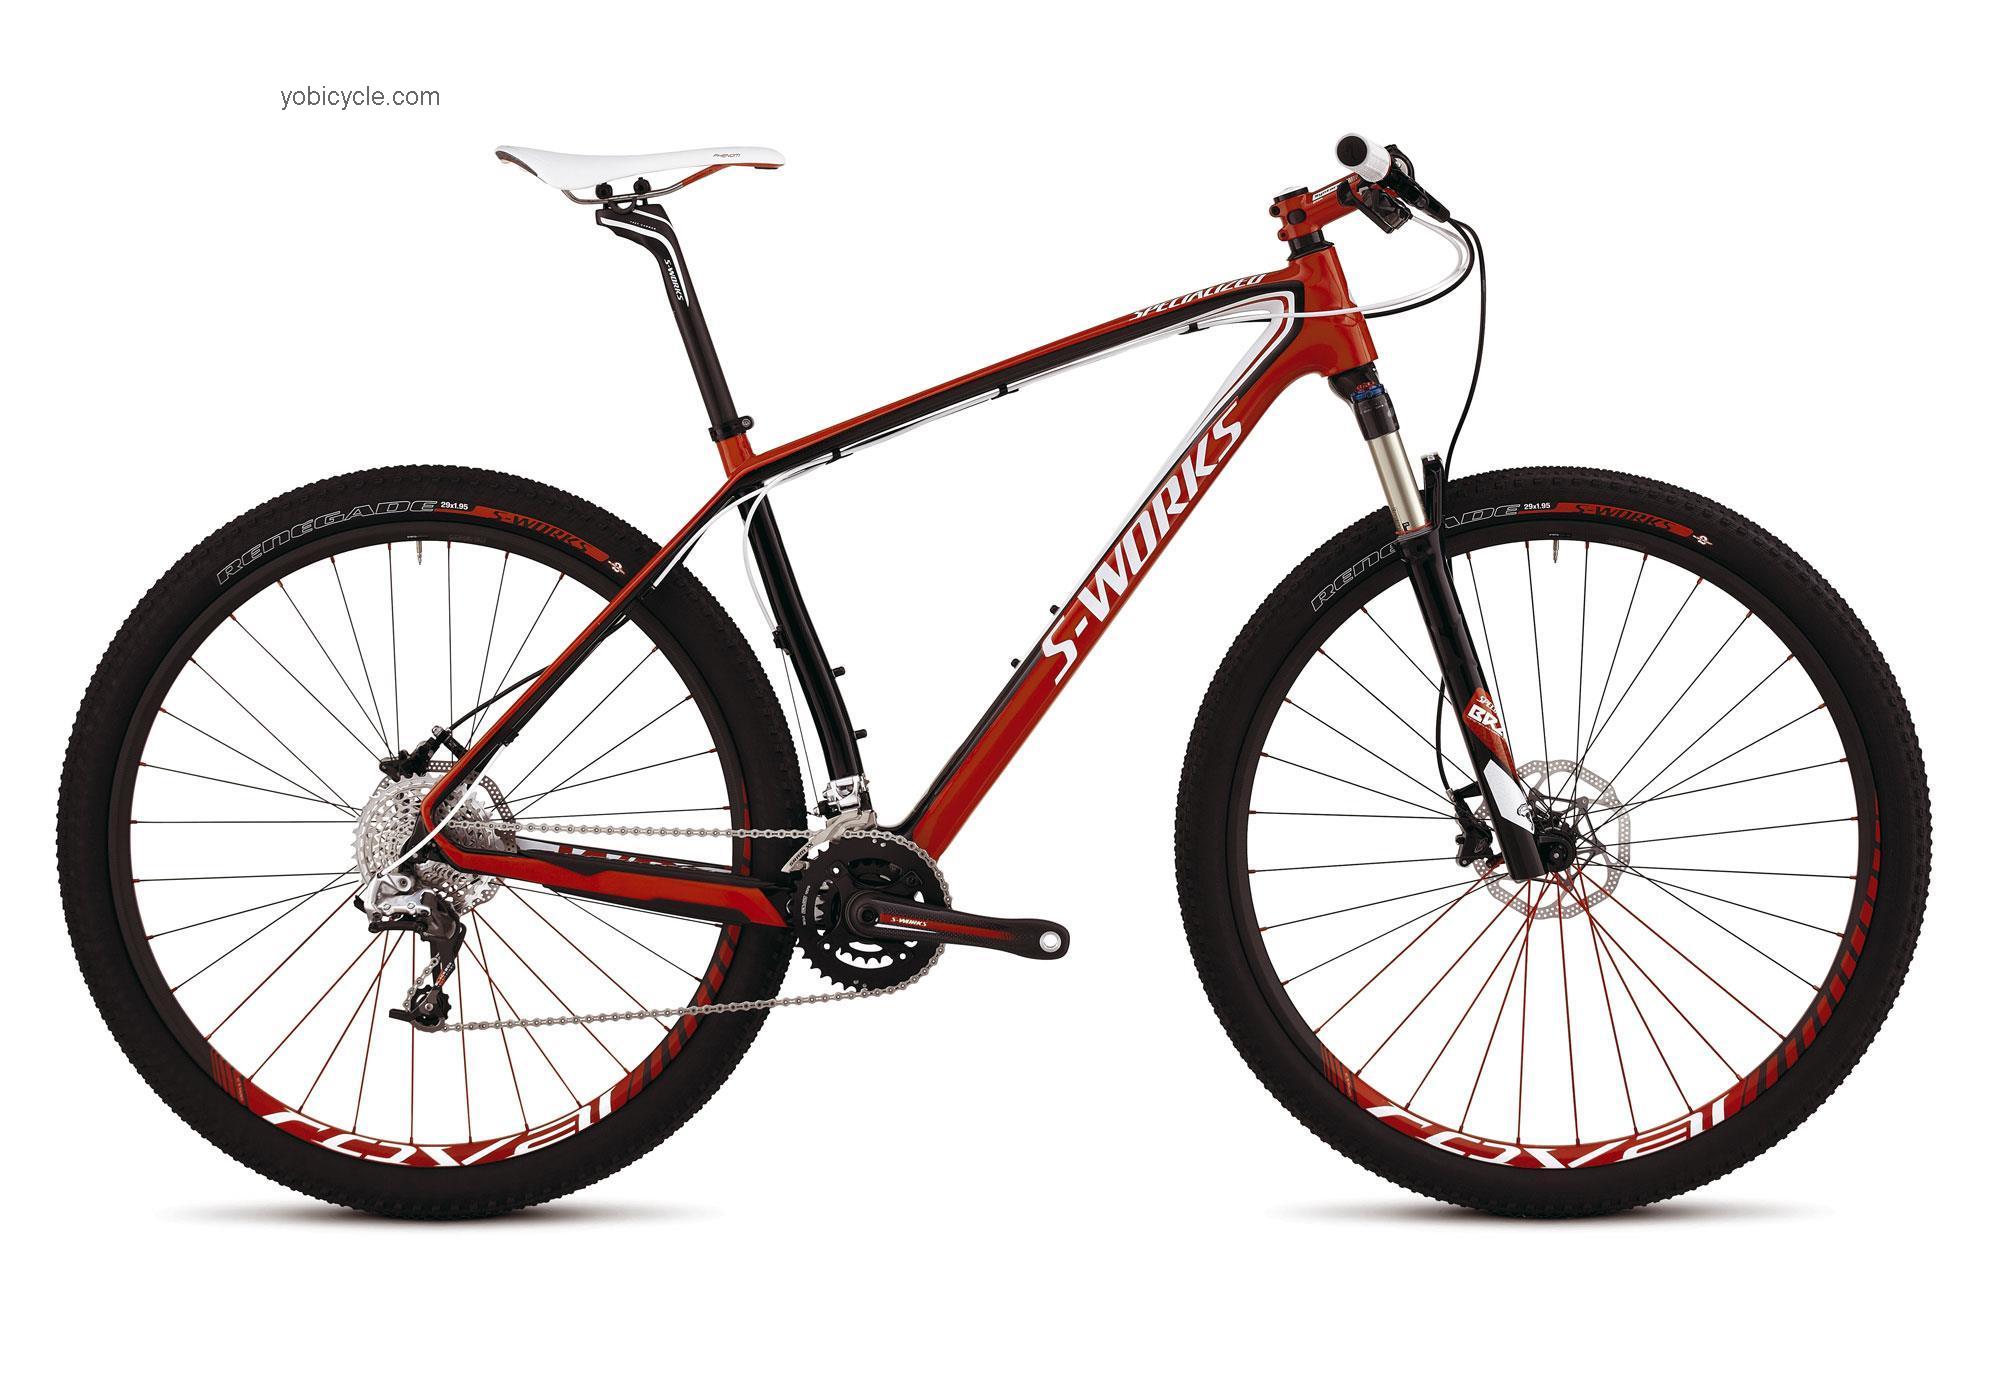 Specialized S-Works Stumpjumper HT Carbon 29 XX 2012 comparison online with competitors